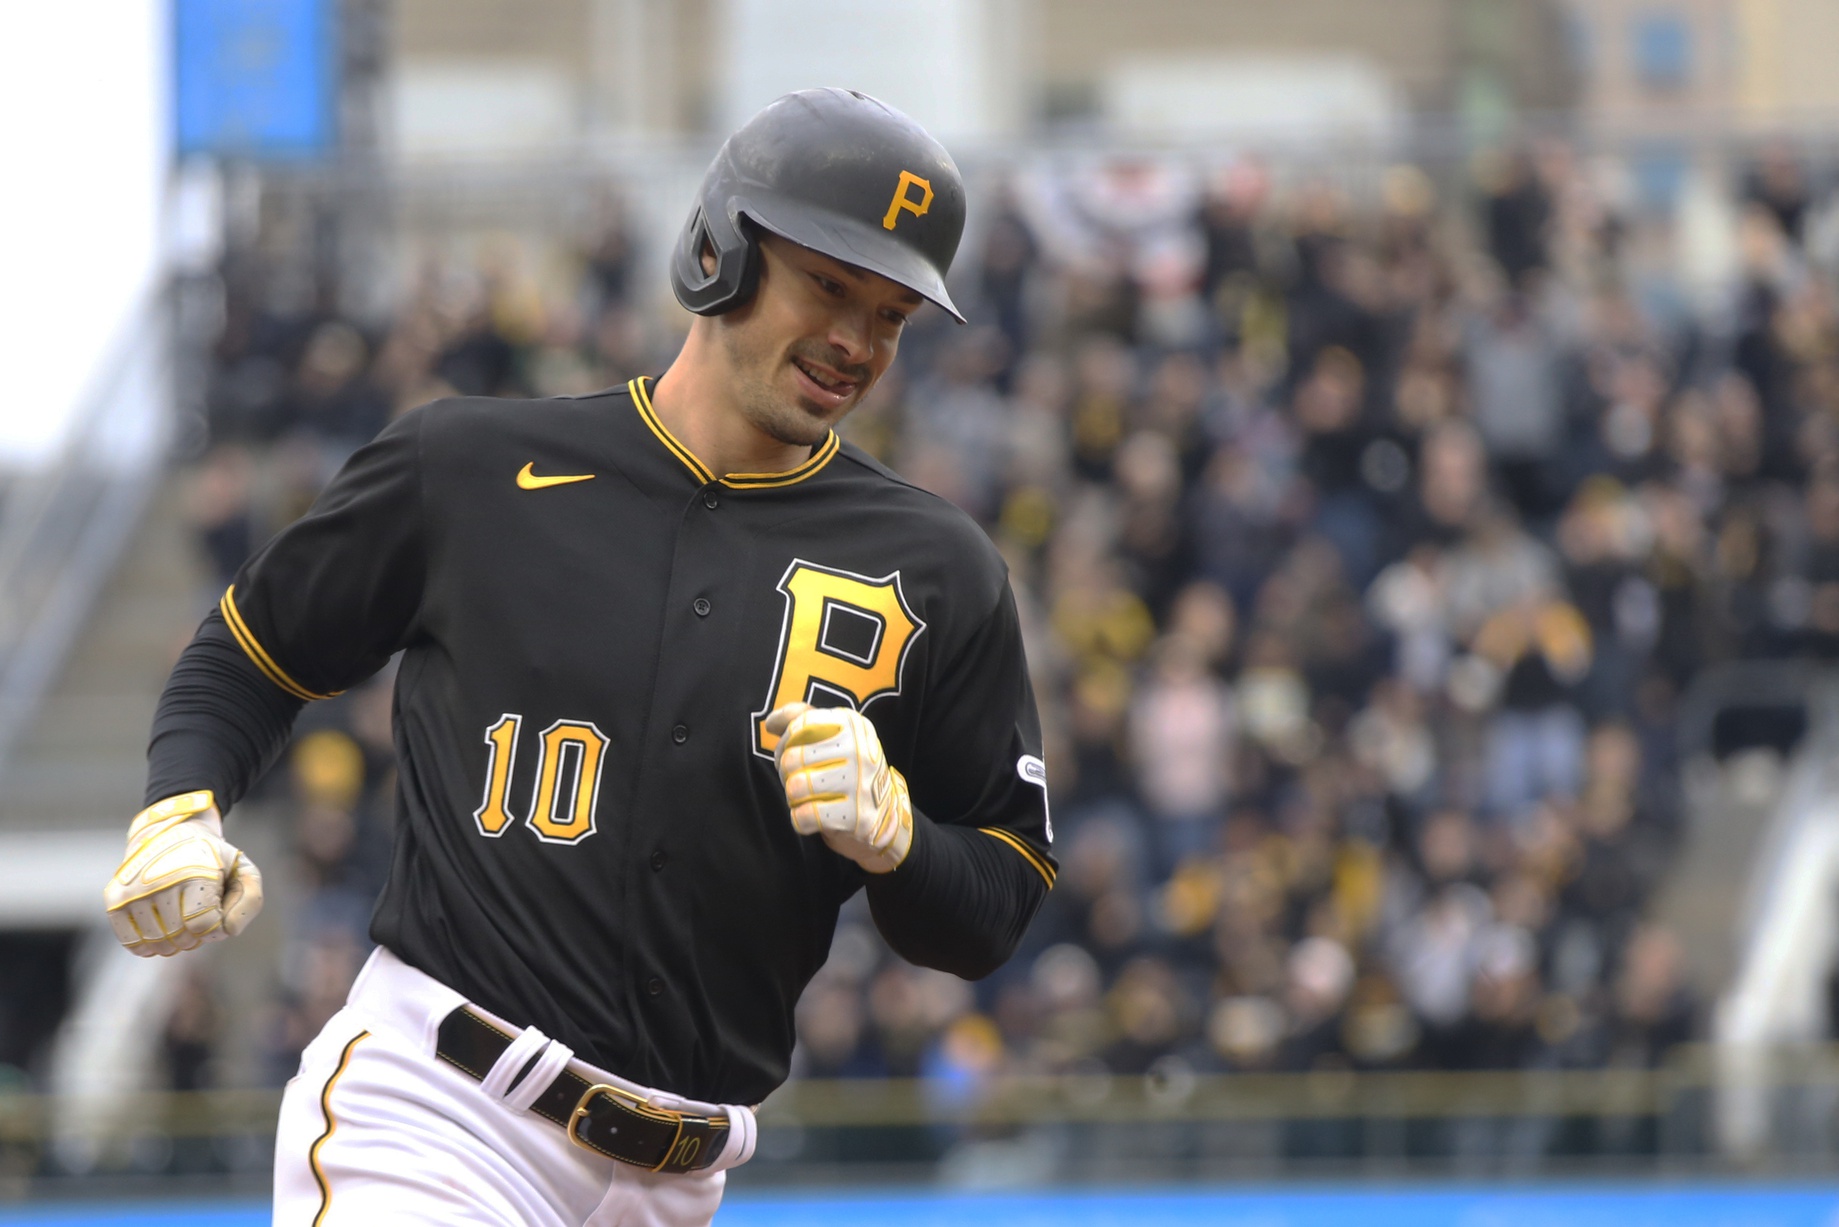 The 20 Best Throwback Uniforms in Sports History  Pittsburgh pirates,  Throwback, Baseball uniforms